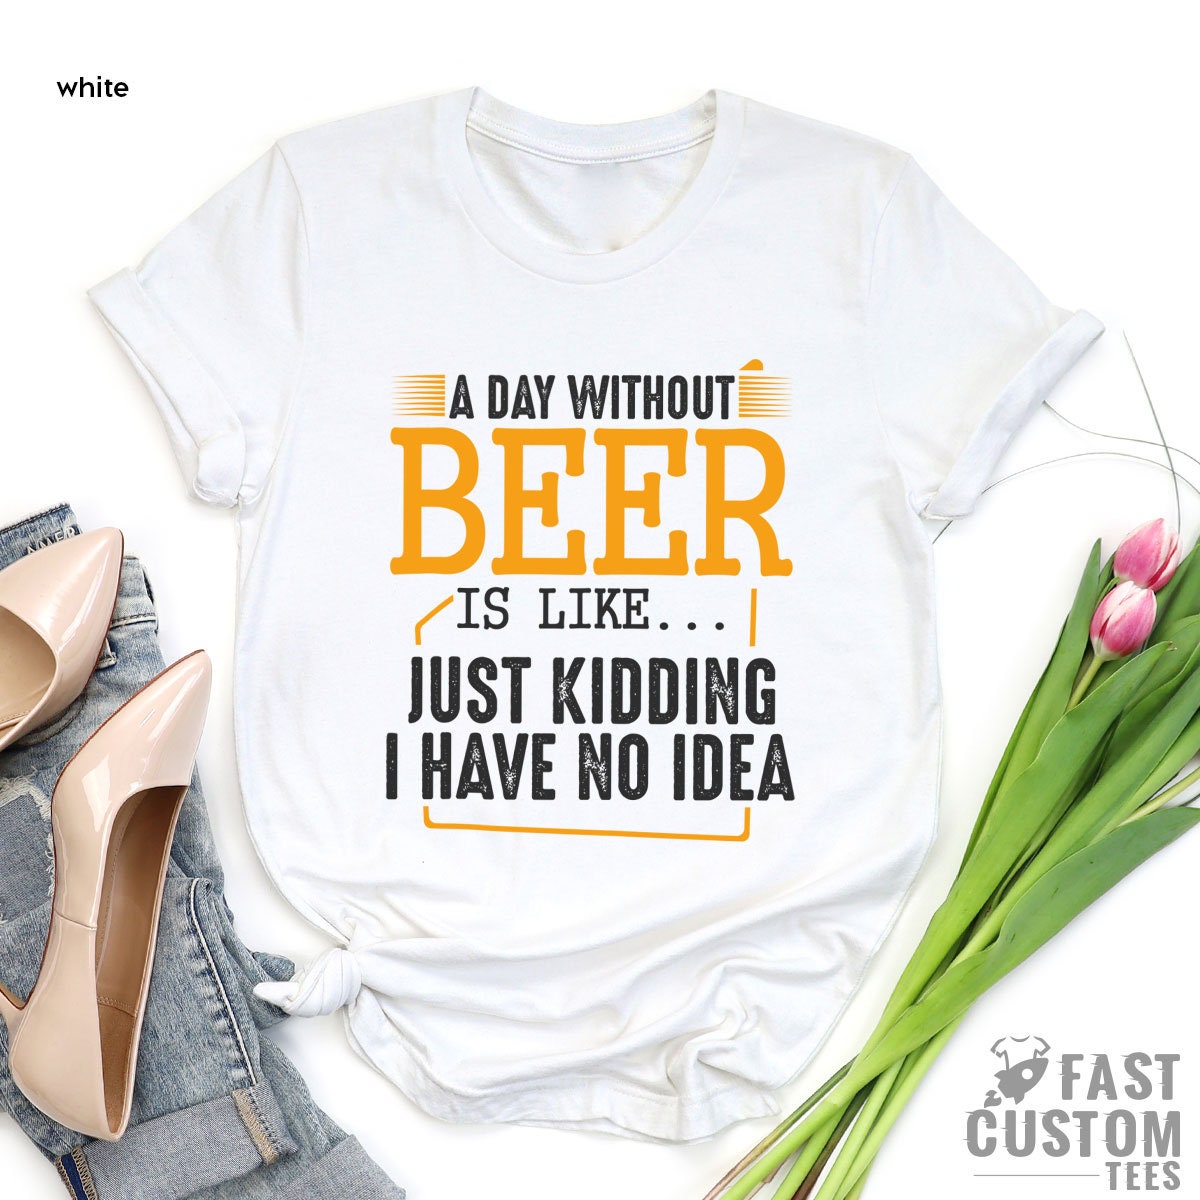 Funny Beer Shirt, A Day Without Beer Is Like Just Kidding I Have No Idea, Drinking Beer T-Shirt, Alcohol TShirt, Beer Lover, Funny Alcoholic - Fastdeliverytees.com